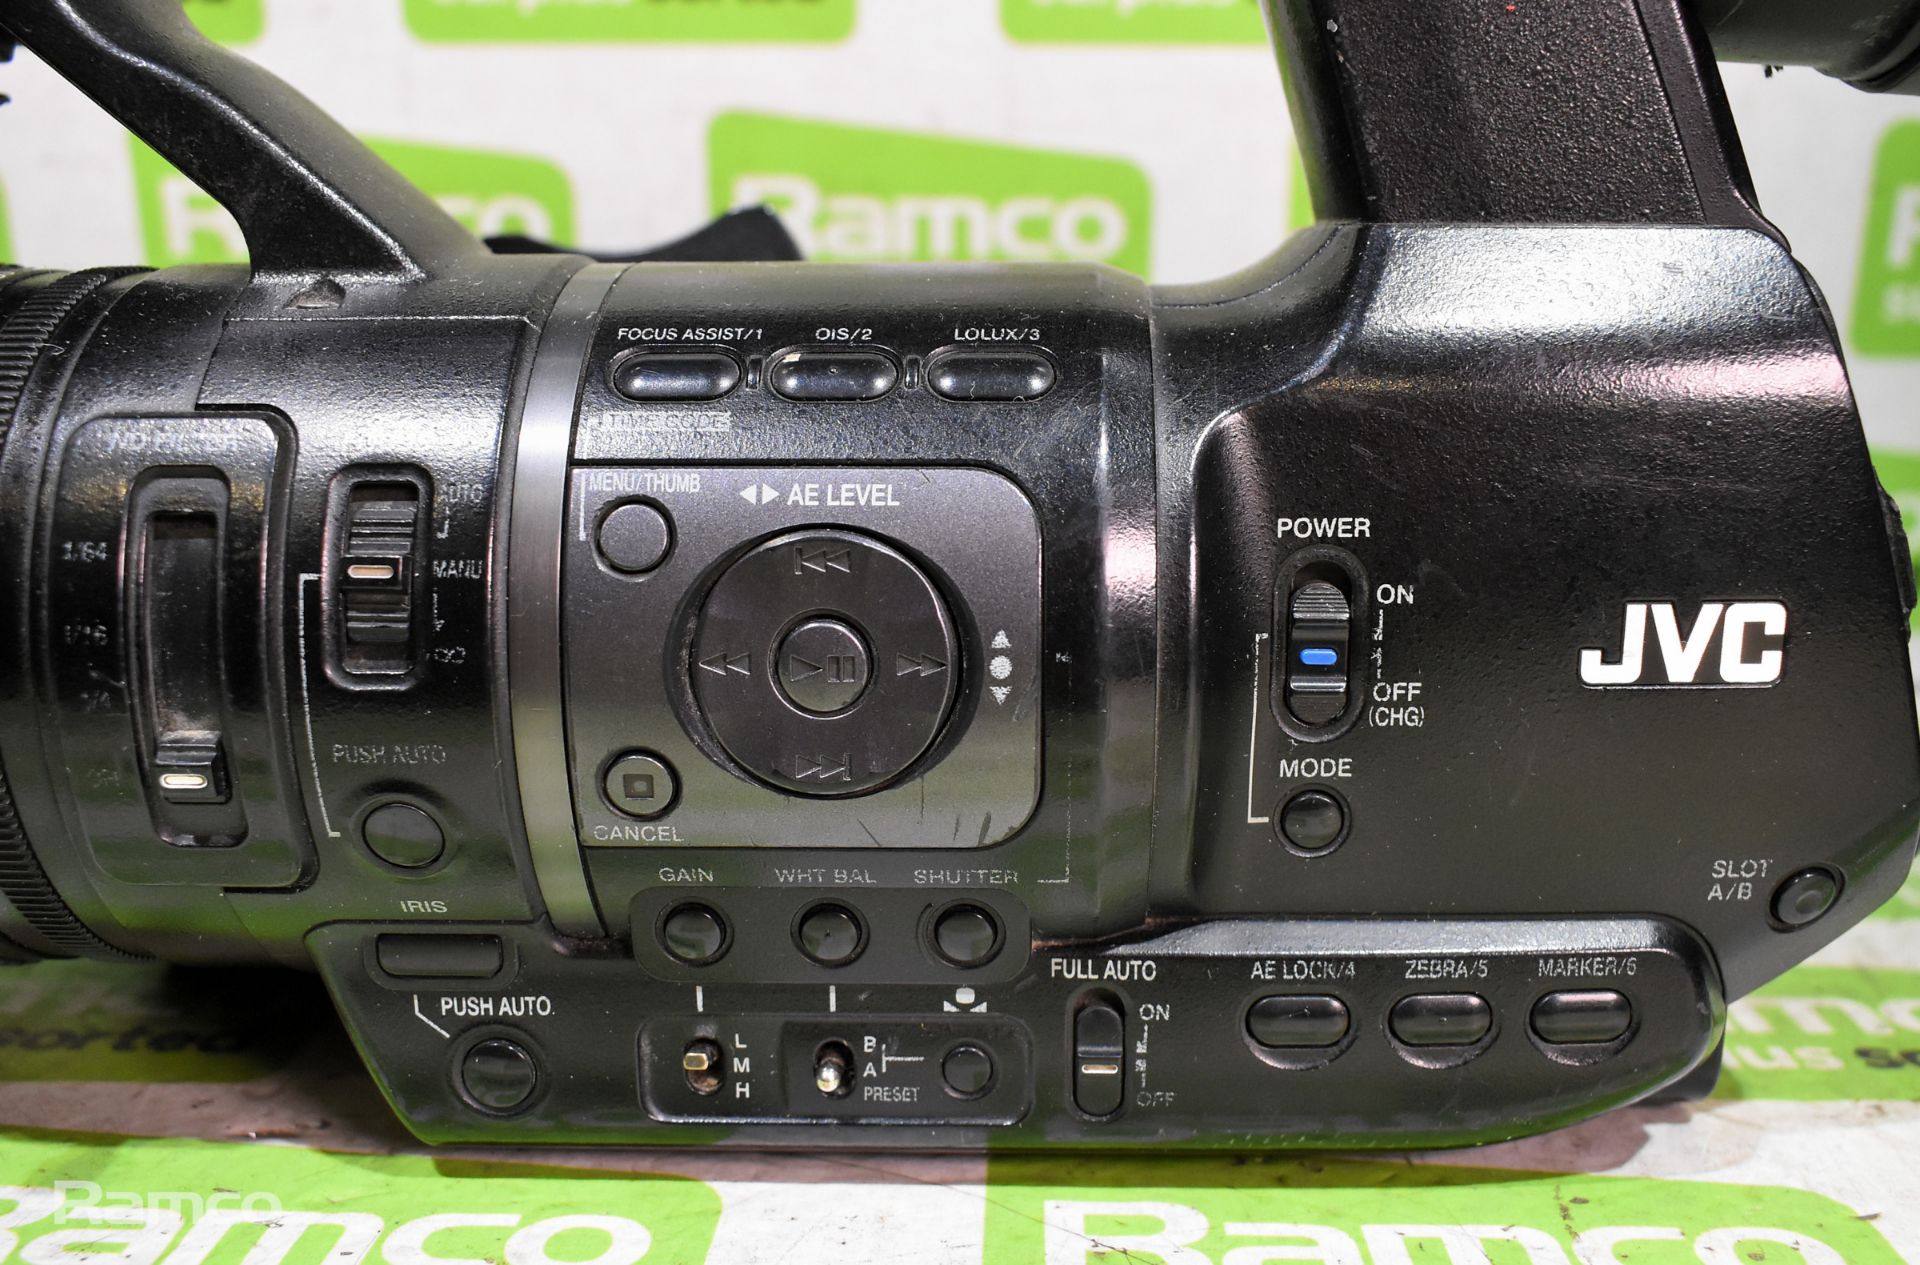 JVC GY-HM650E HD memory card camera recorder, Sony PMW-500 HD-XDCAM camcorder body - SPARES/REPAIRS - Image 5 of 21